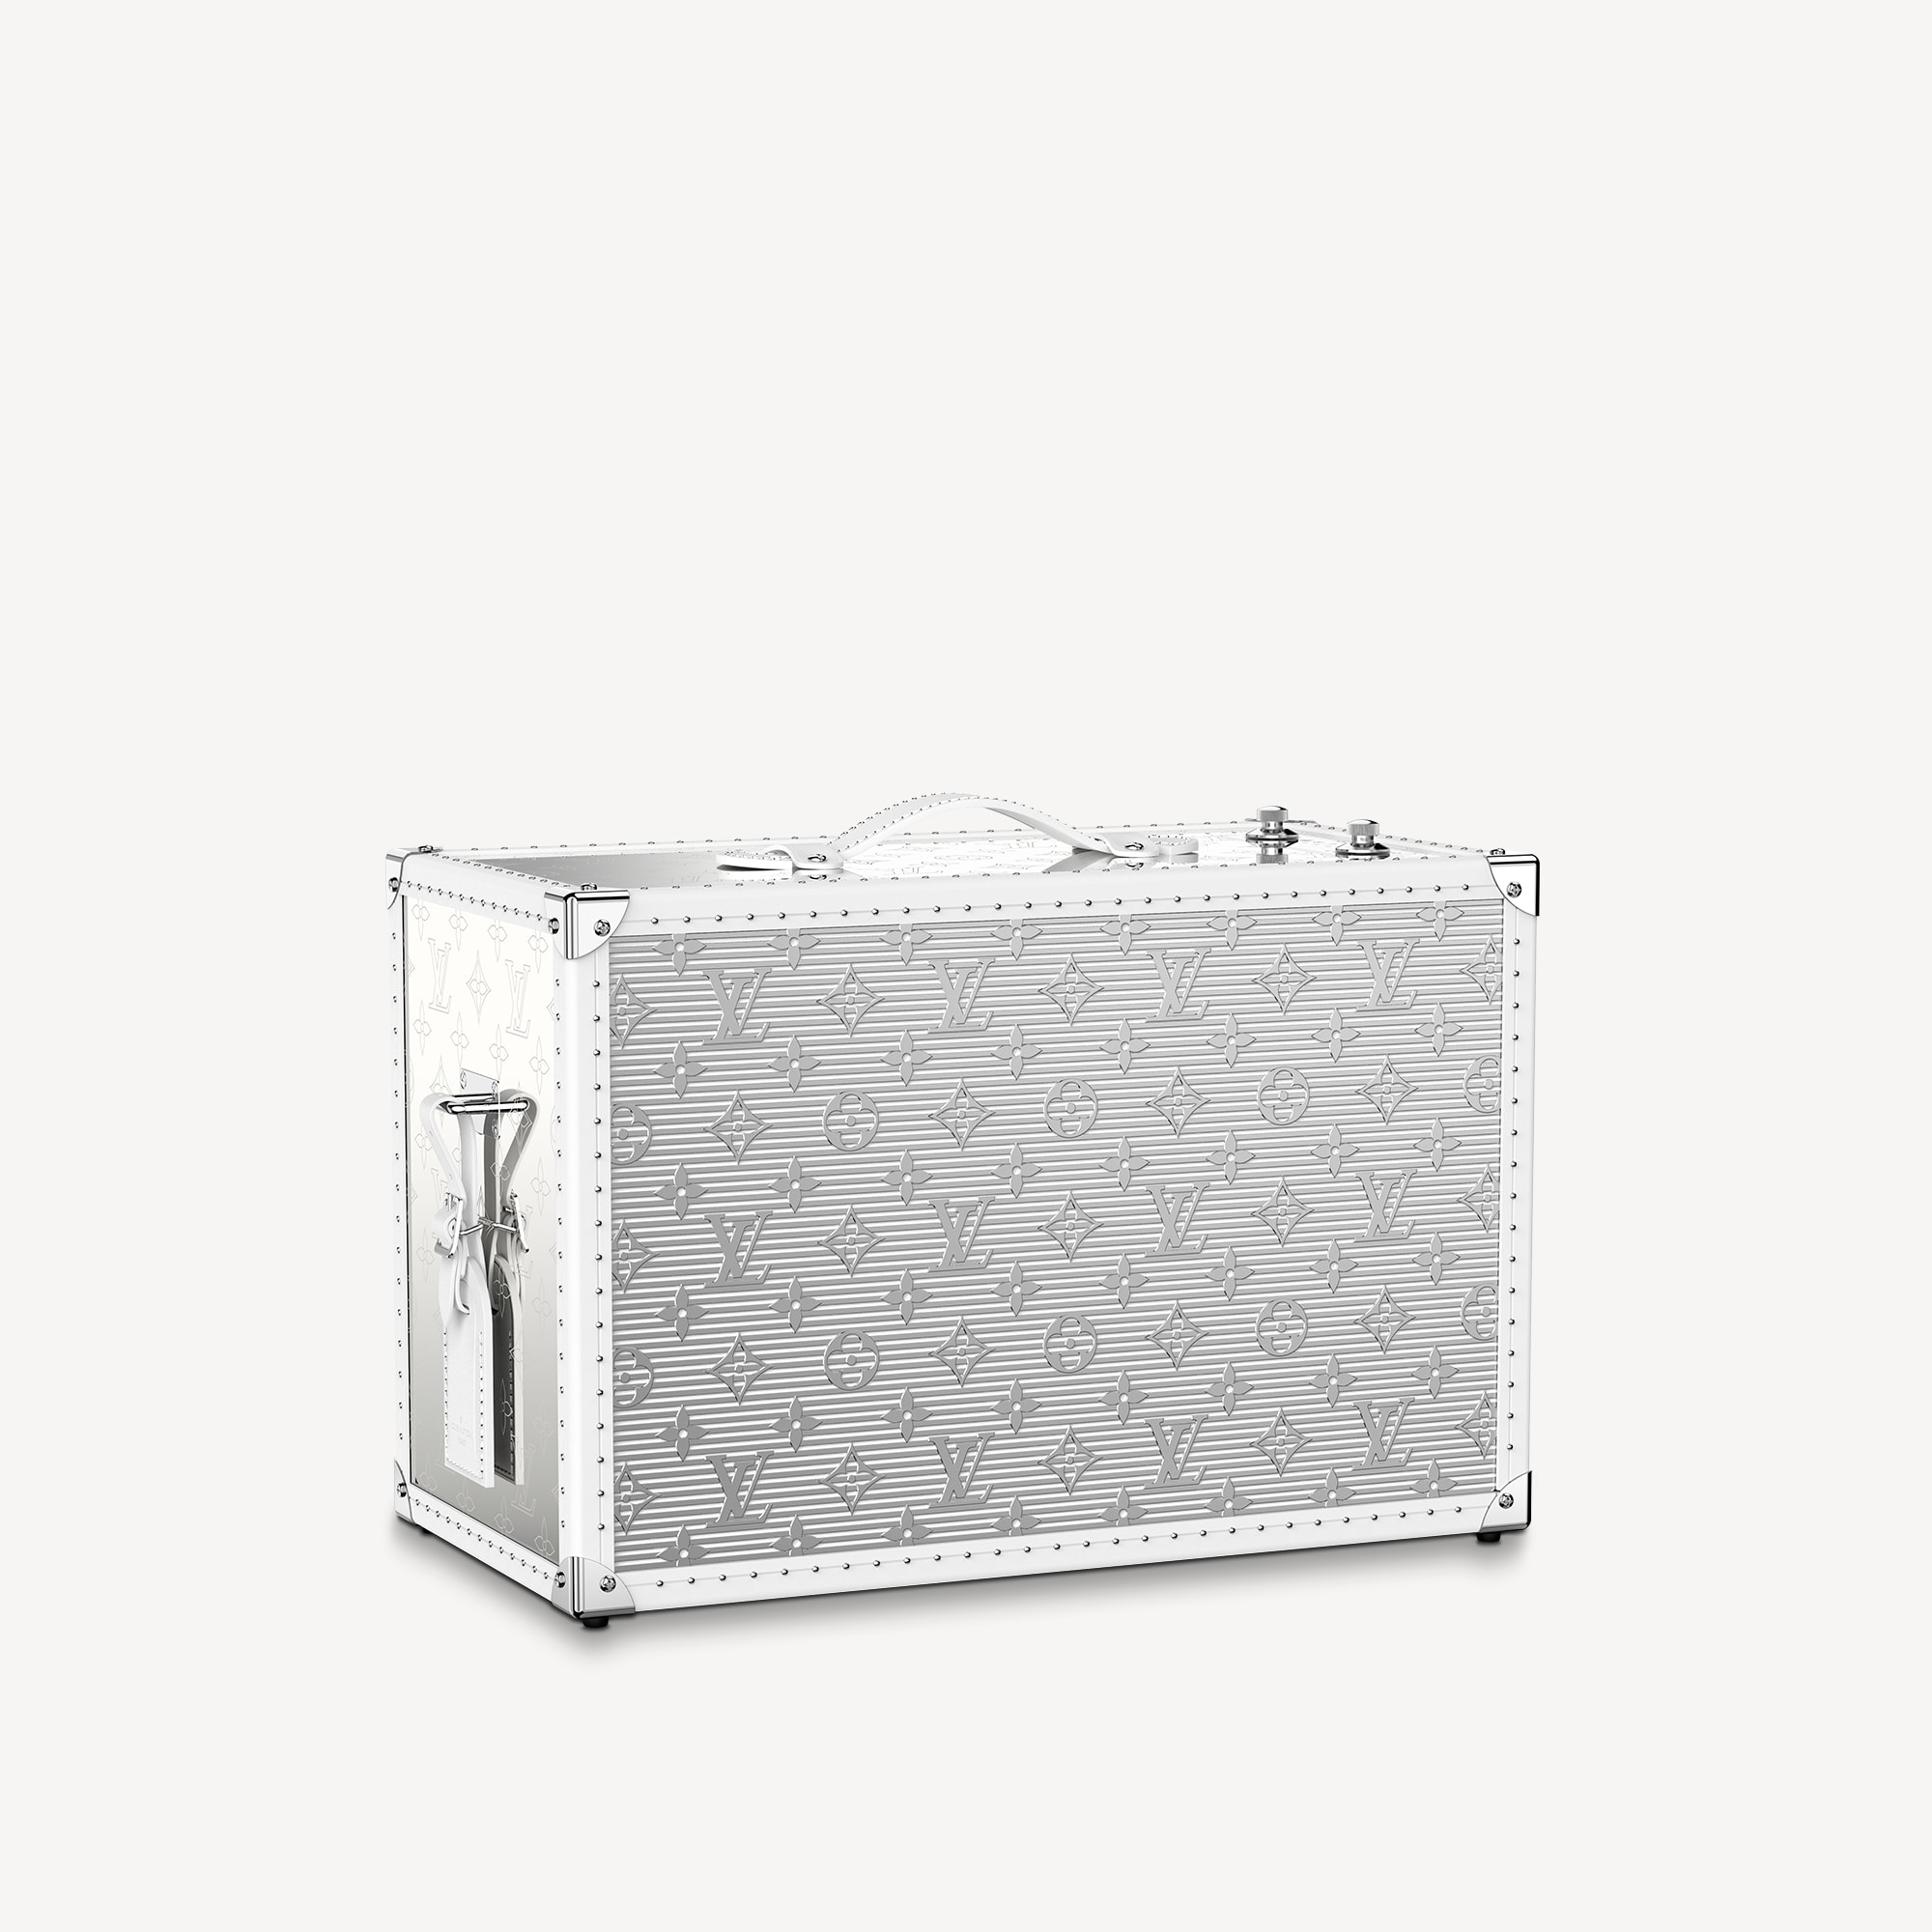 Louis Vuitton  Louis Vuitton Mens Fall Winter 2020 Double function  Speakers as Trunks from Virgil Ablohs recent Louis Vuitton Fashion Show  Watch the show on Facebook and at httponlouisvuittoncom61801dZke   Facebook